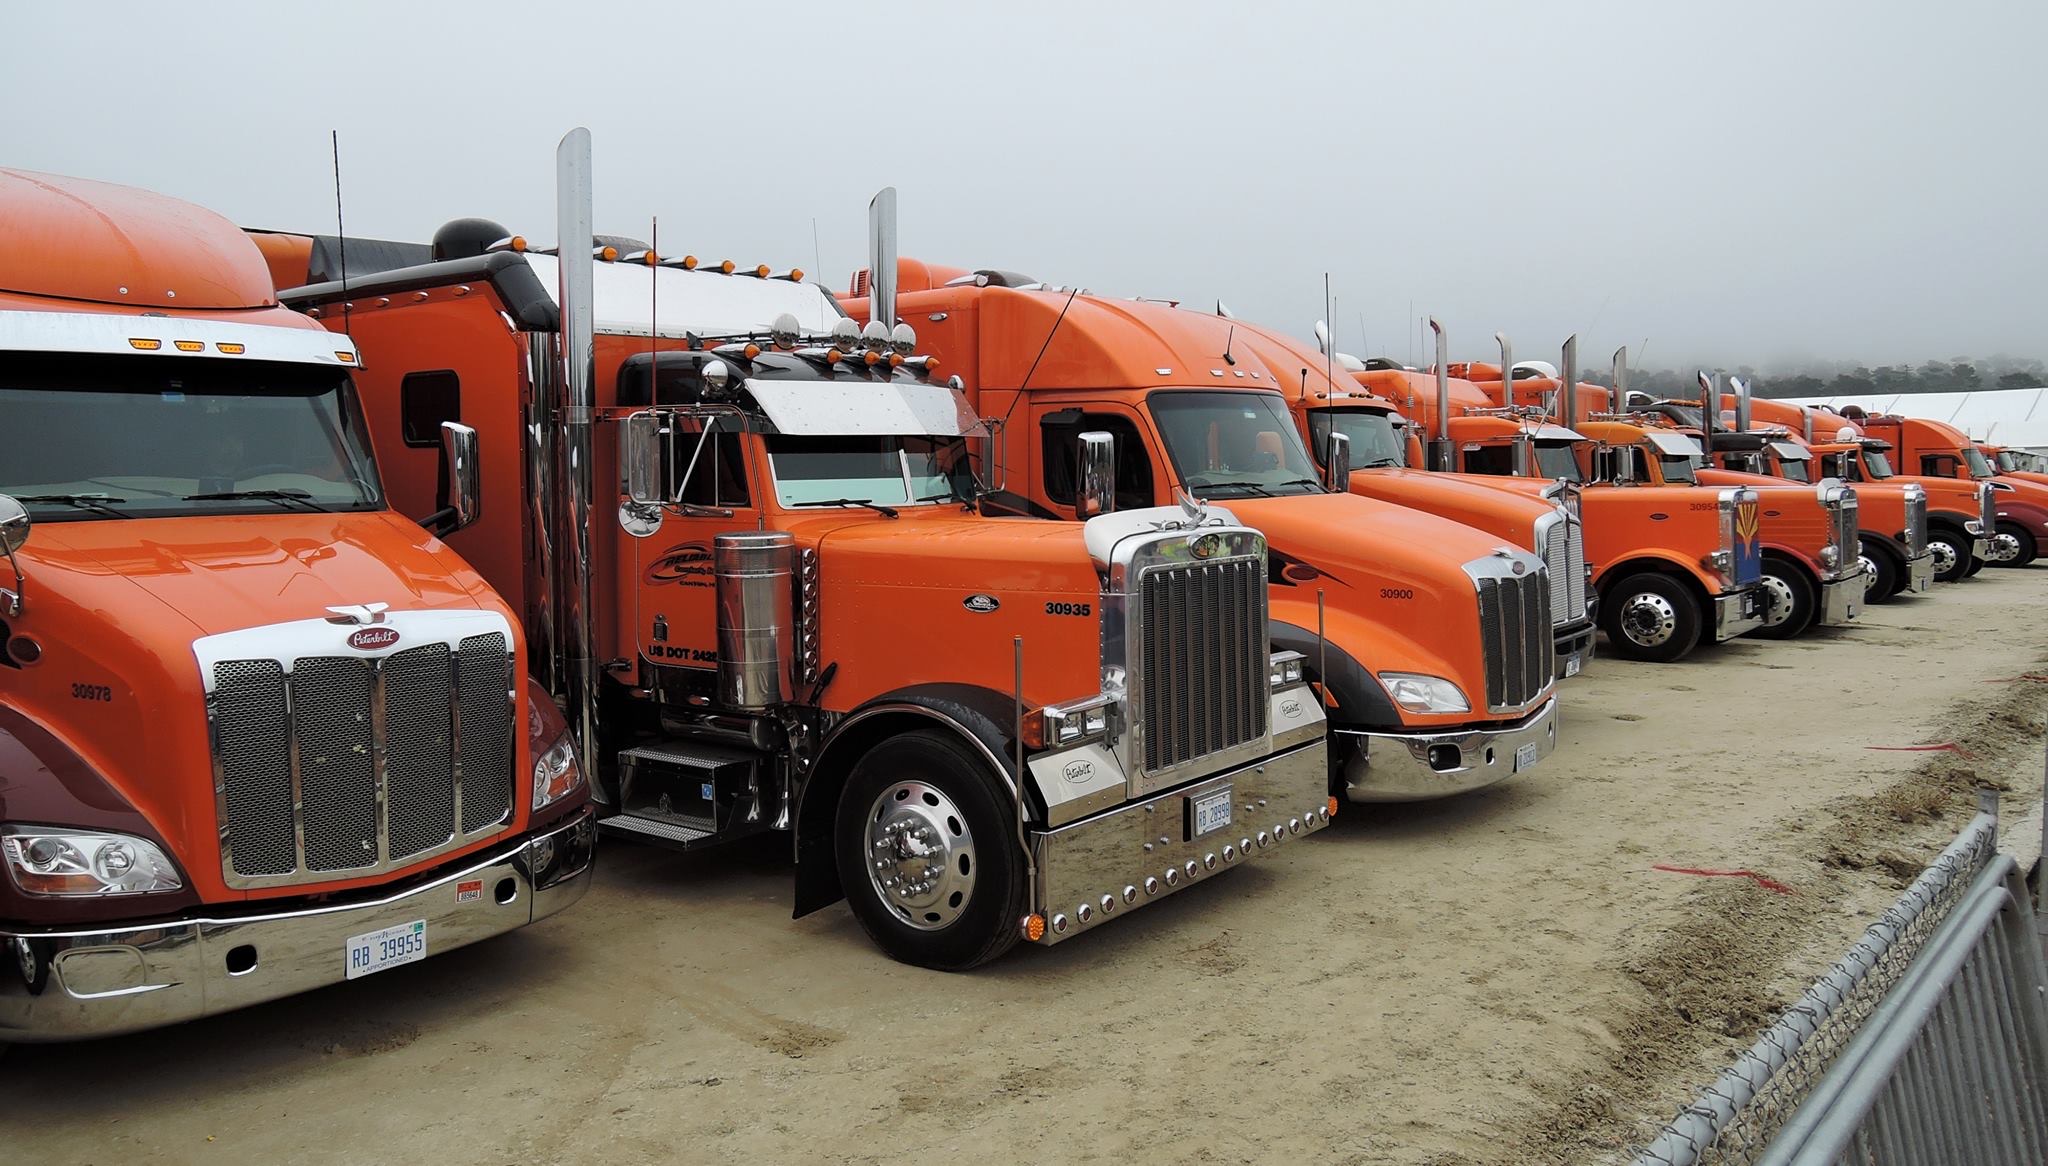 Reliable Carriers, Monterey movers: Reliable delivers more than 100 truckloads of classics to the peninsula, ClassicCars.com Journal